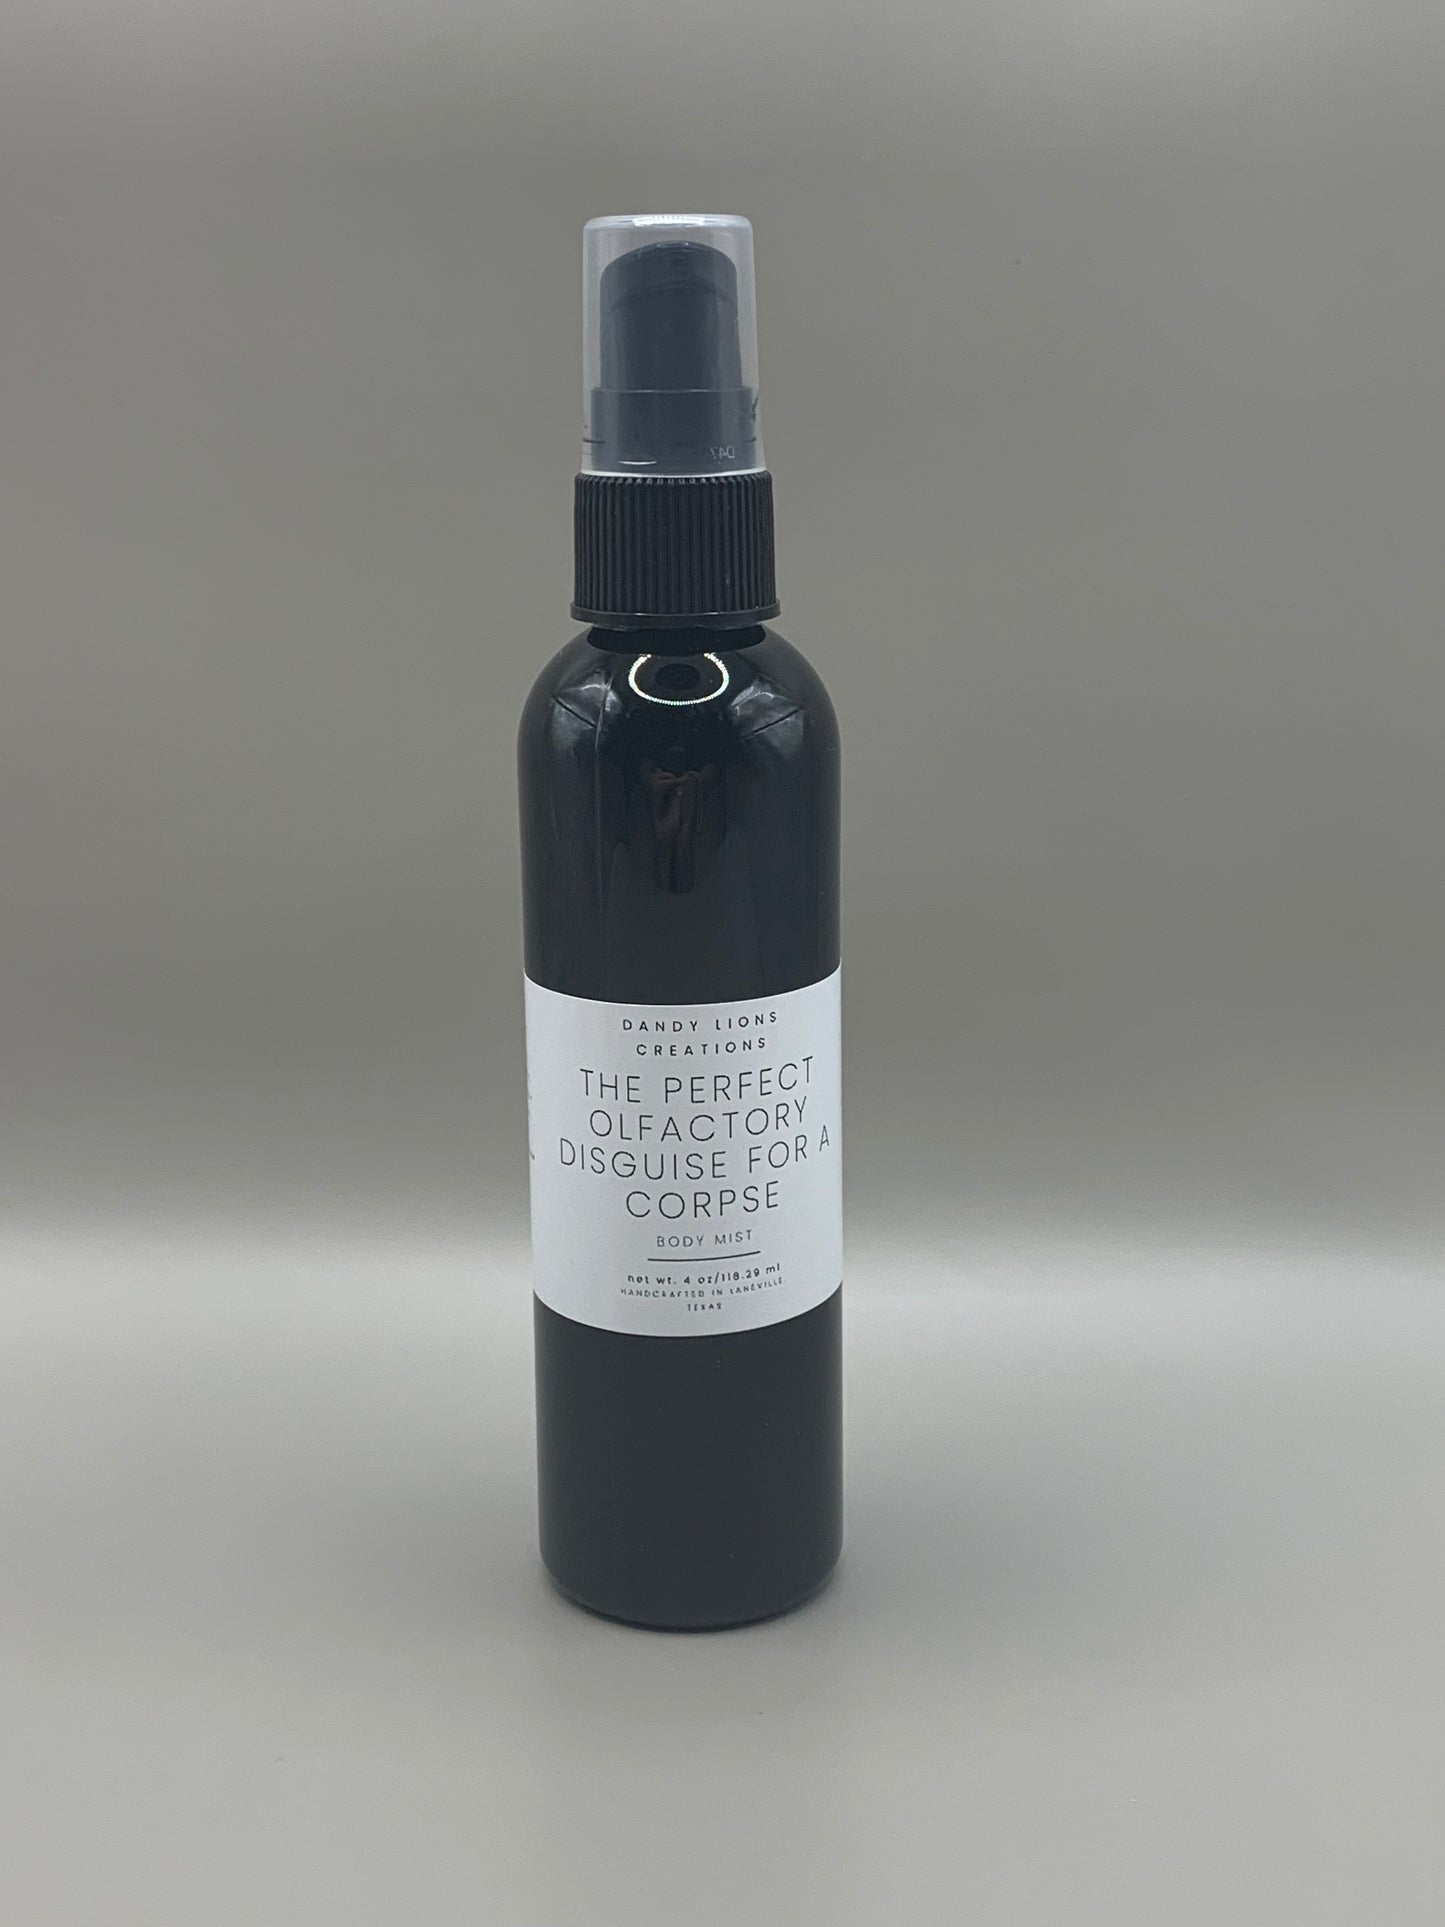 The Perfect Olfactory Disguise for a Corpse body mist